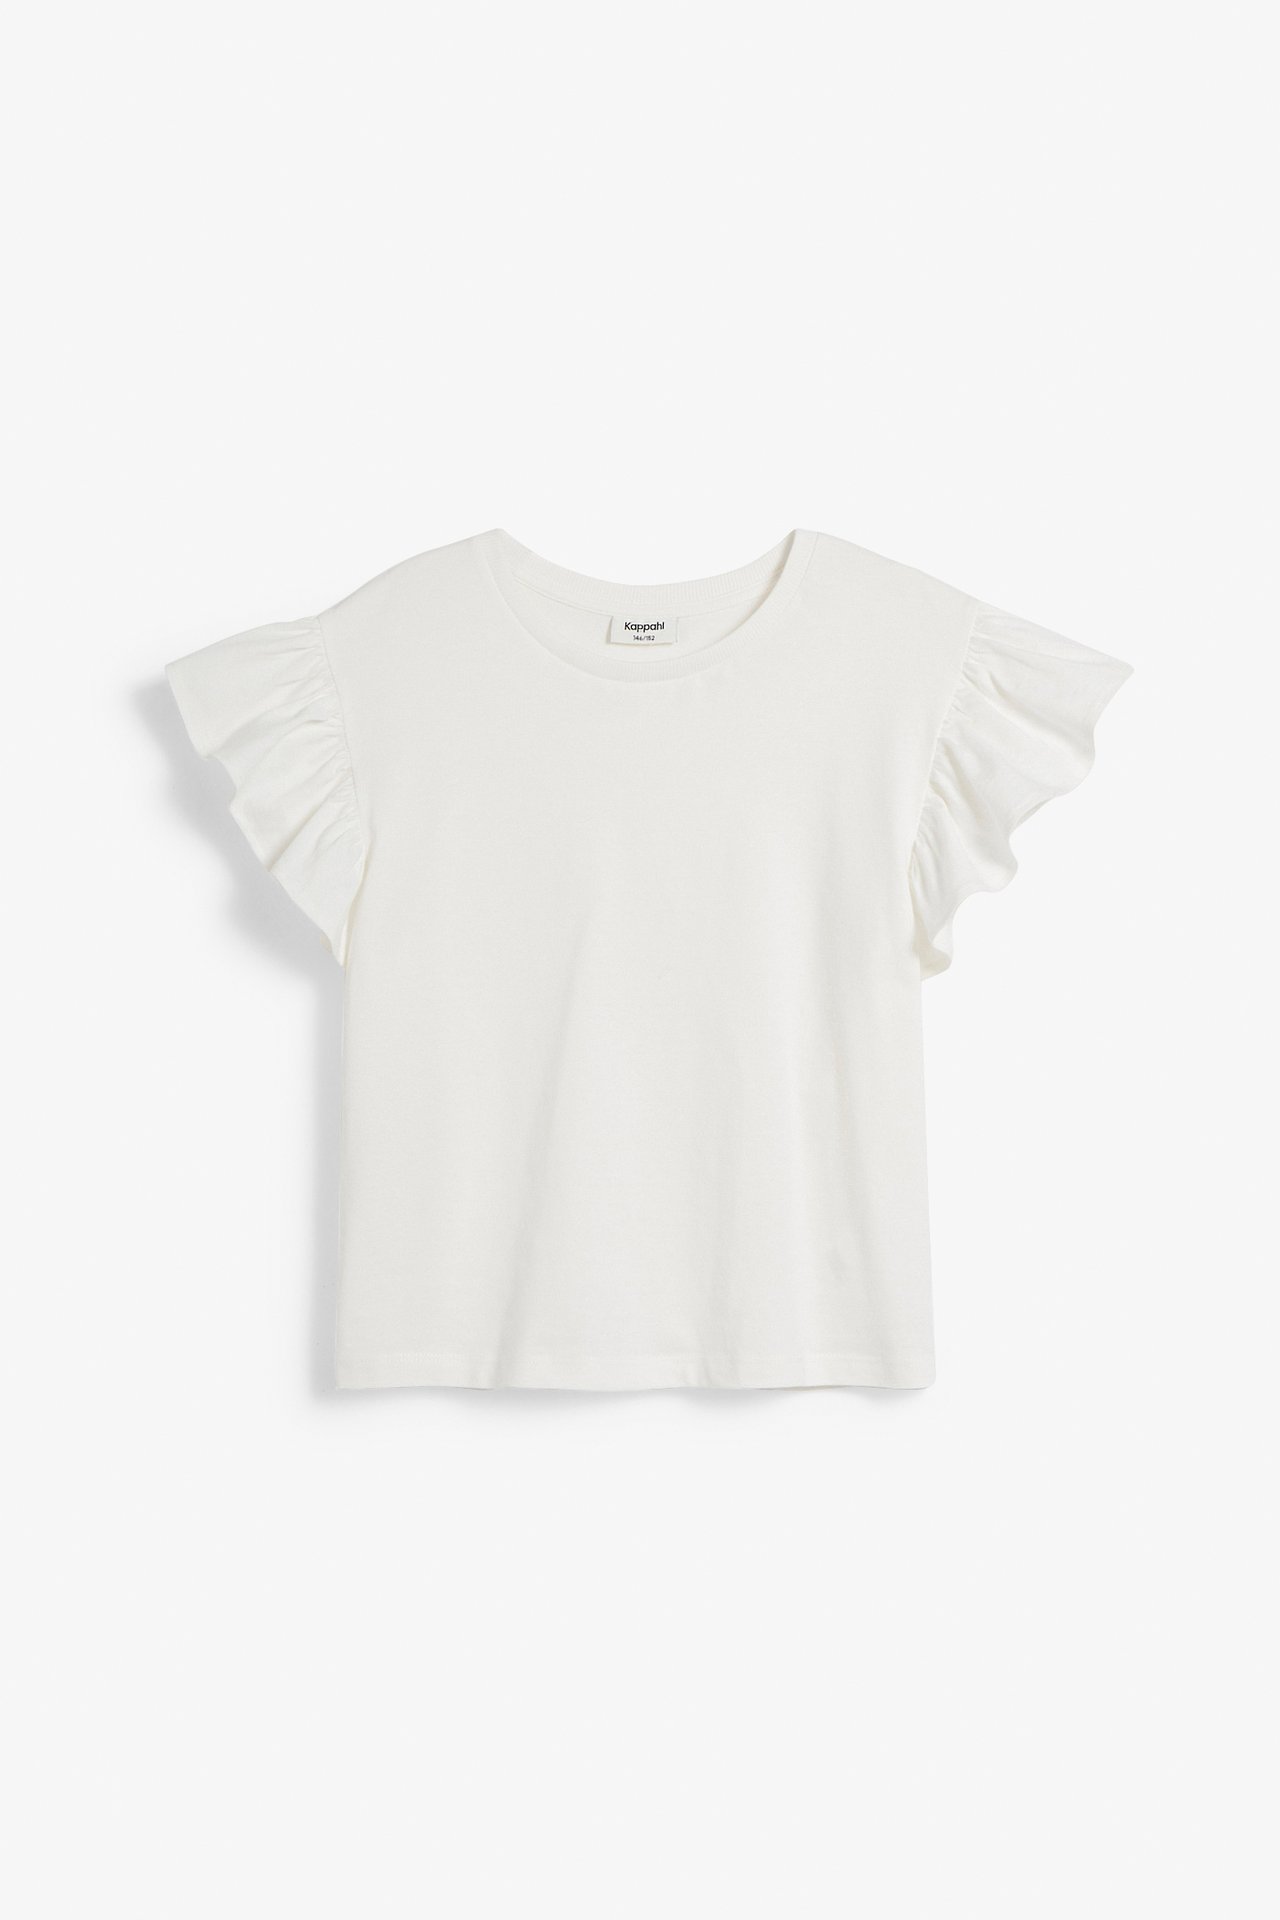 Top - Offwhite - 5